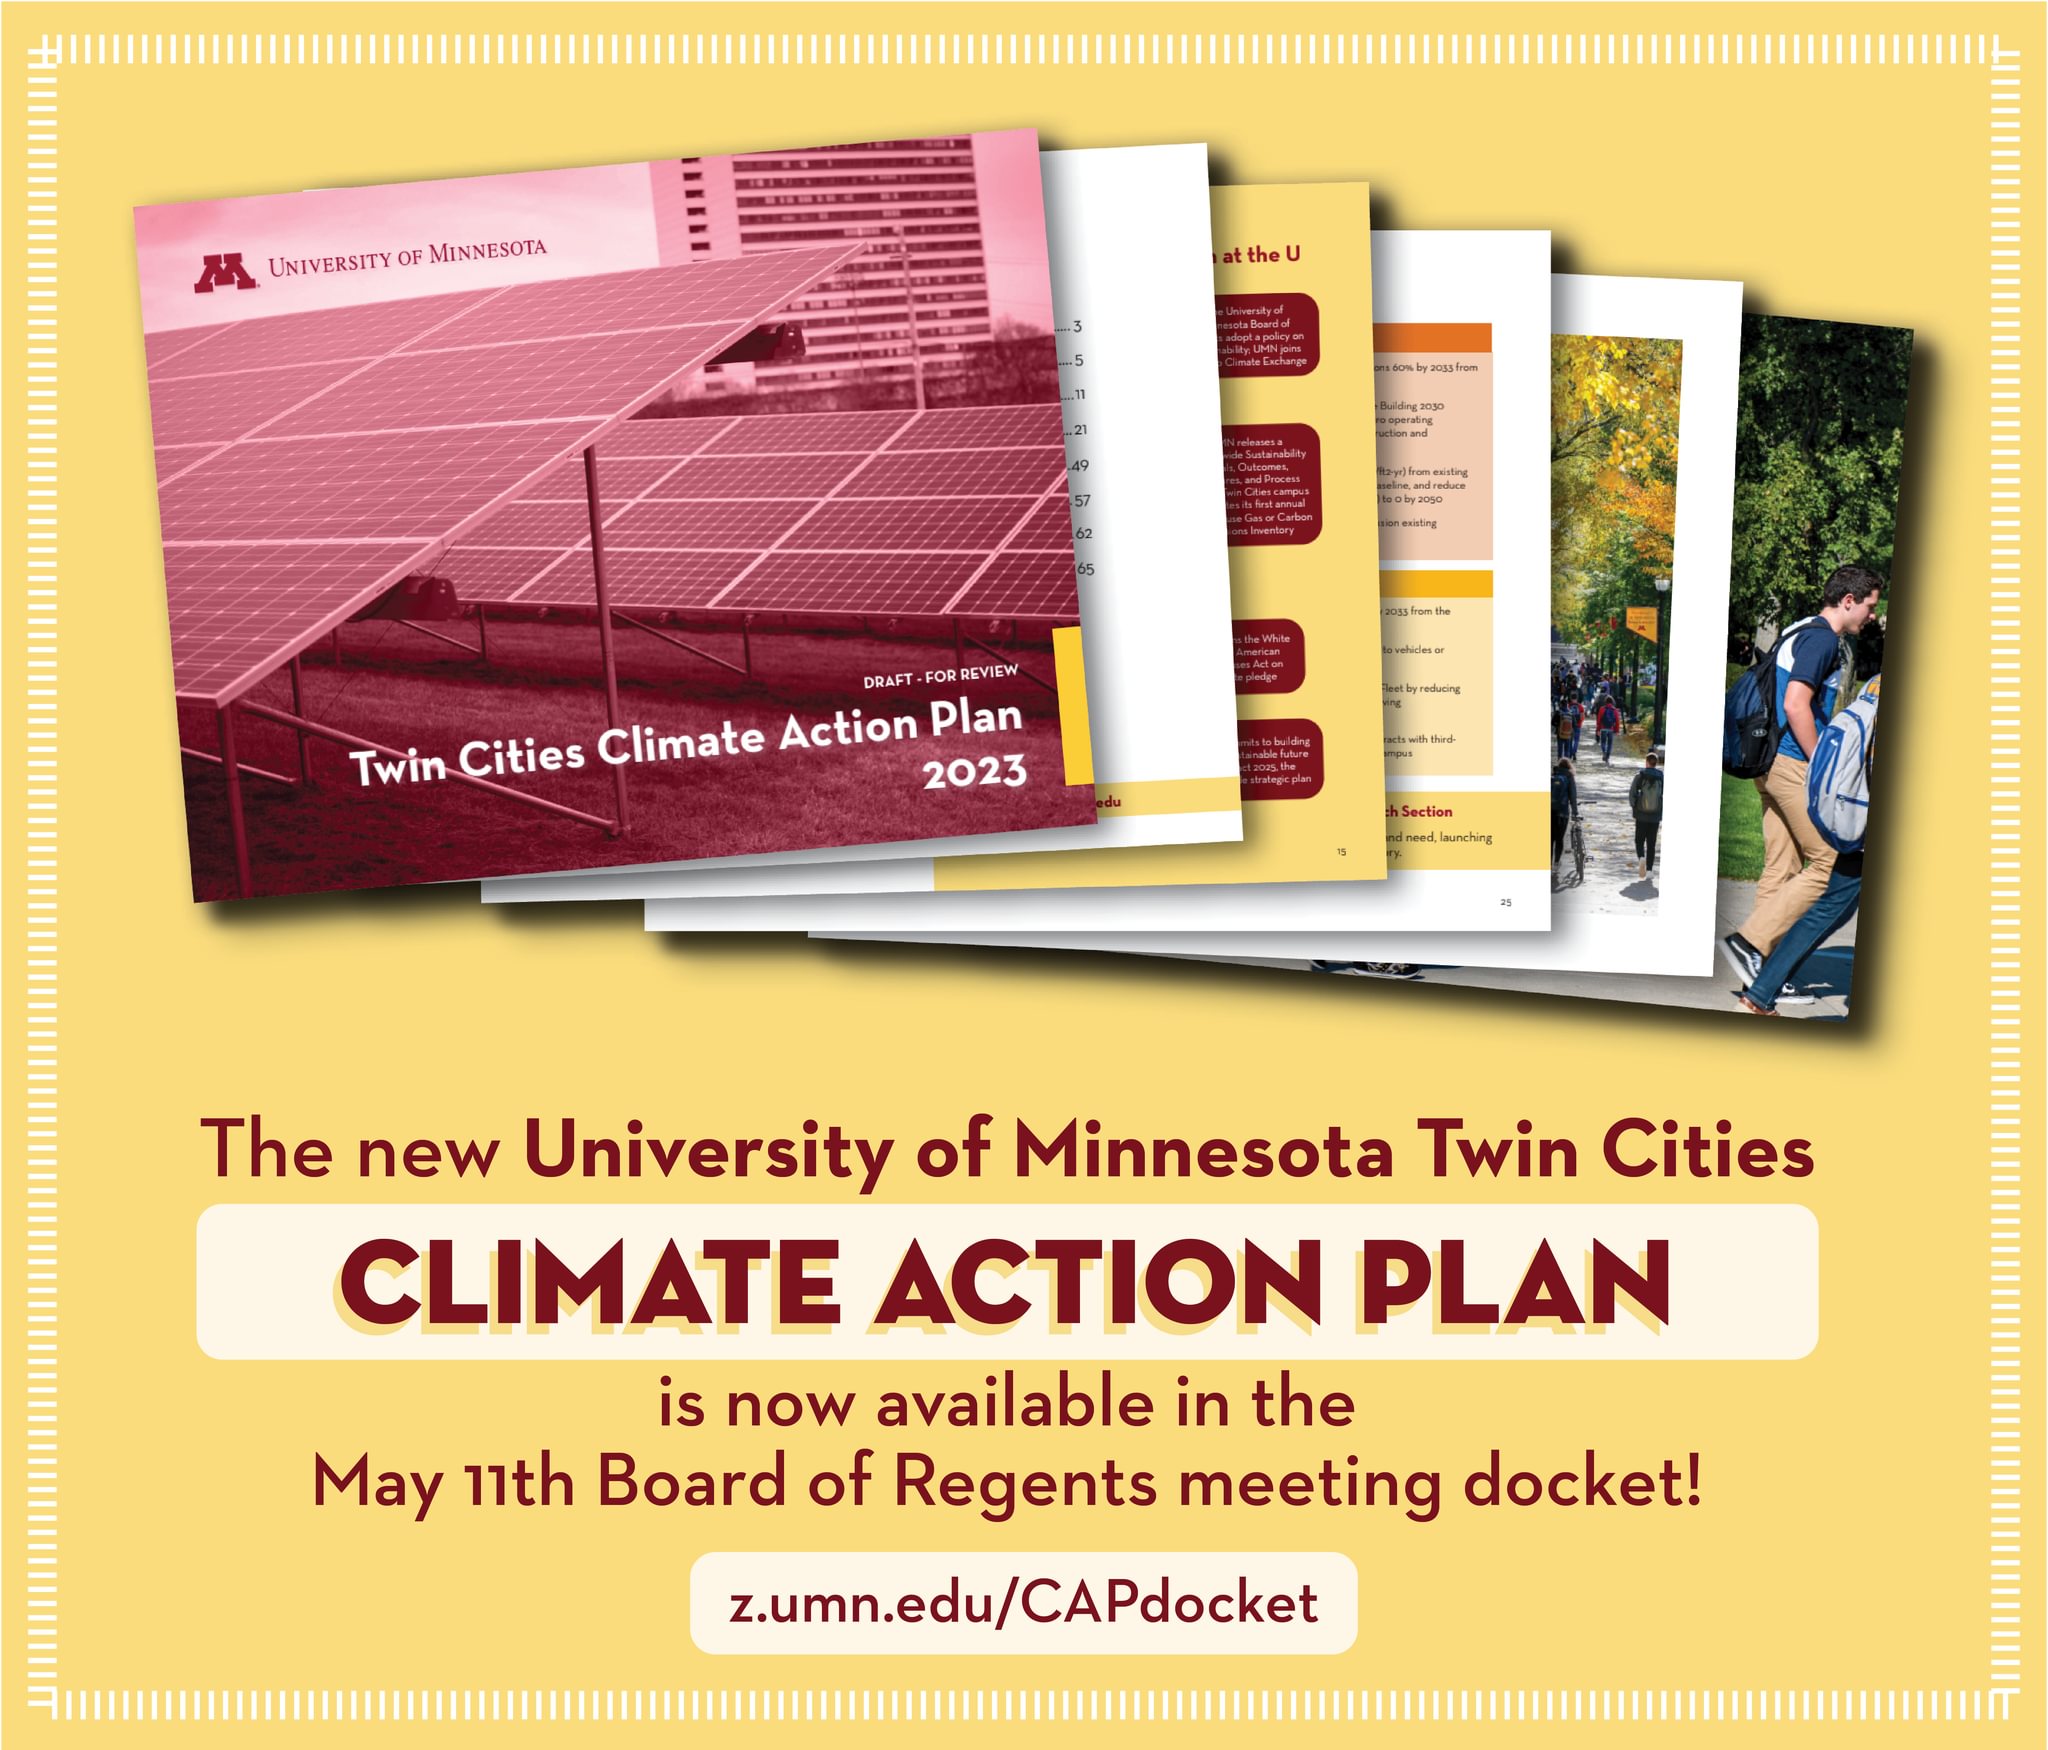 University of Minnesota Twin Cities Climate Action Plan now available 